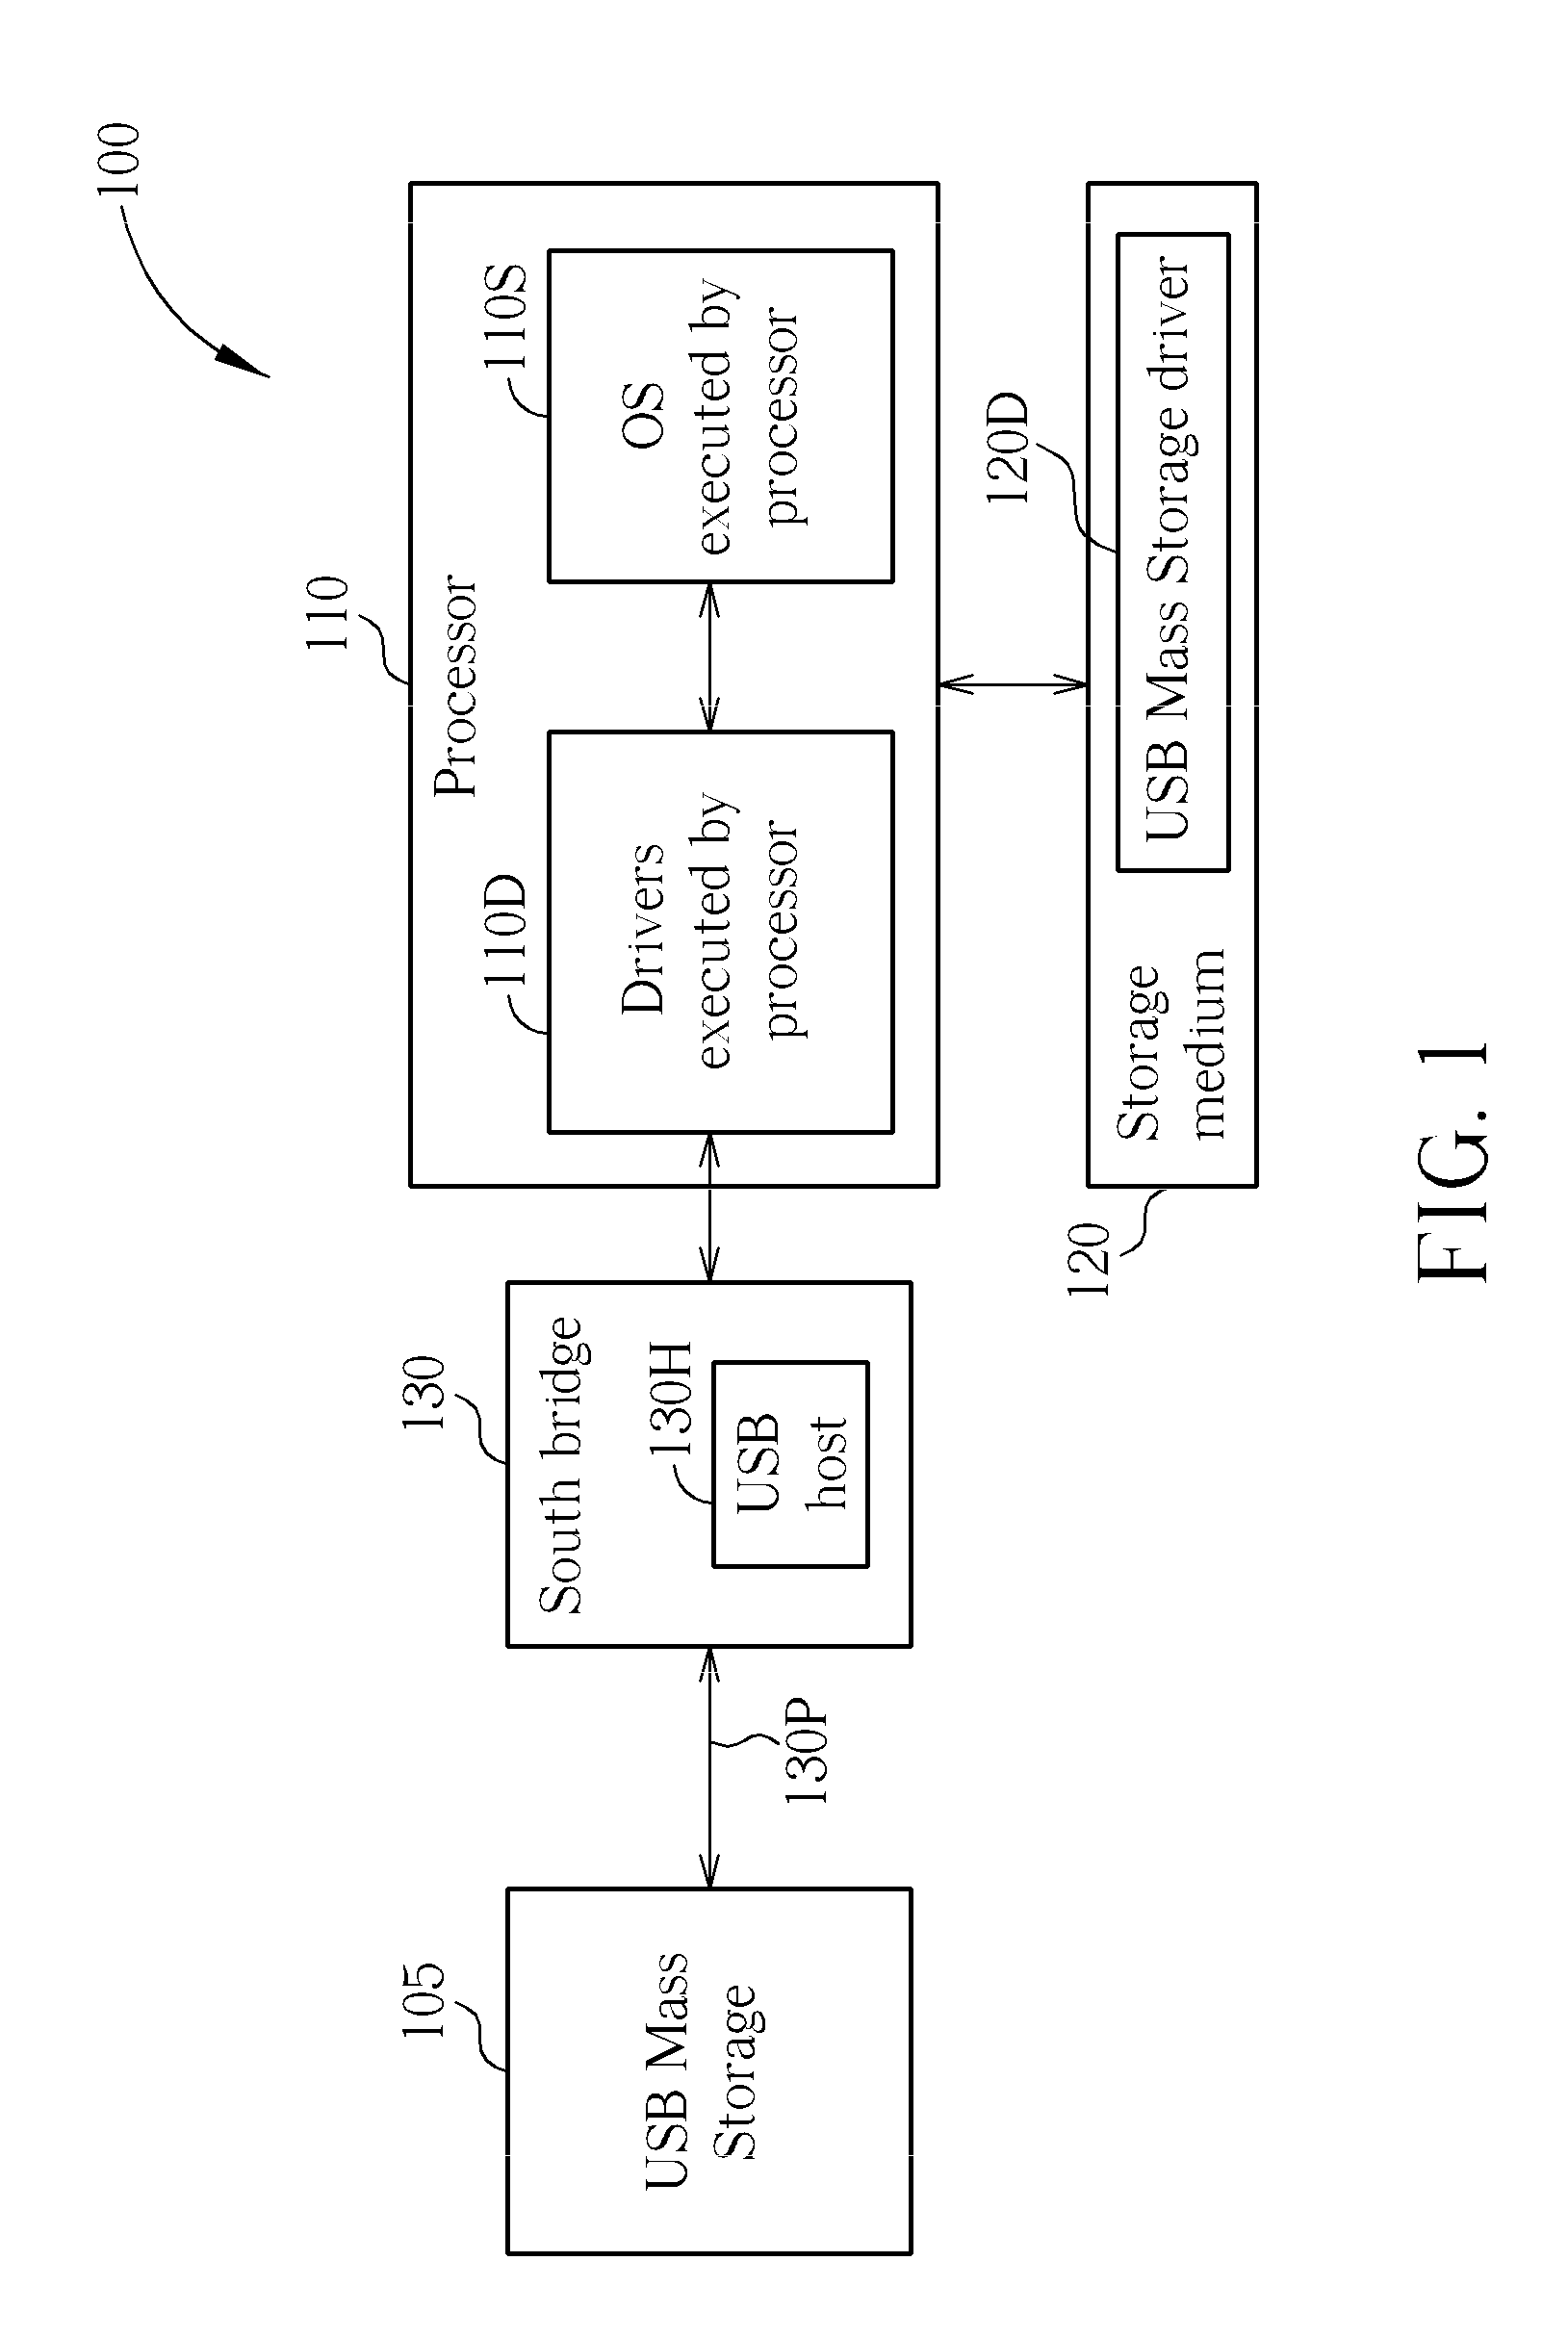 Method for enhancing performance of data access between a personal computer and a USB mass storage, associated personal computer, and storage medium storing an associated USB mass storage driver